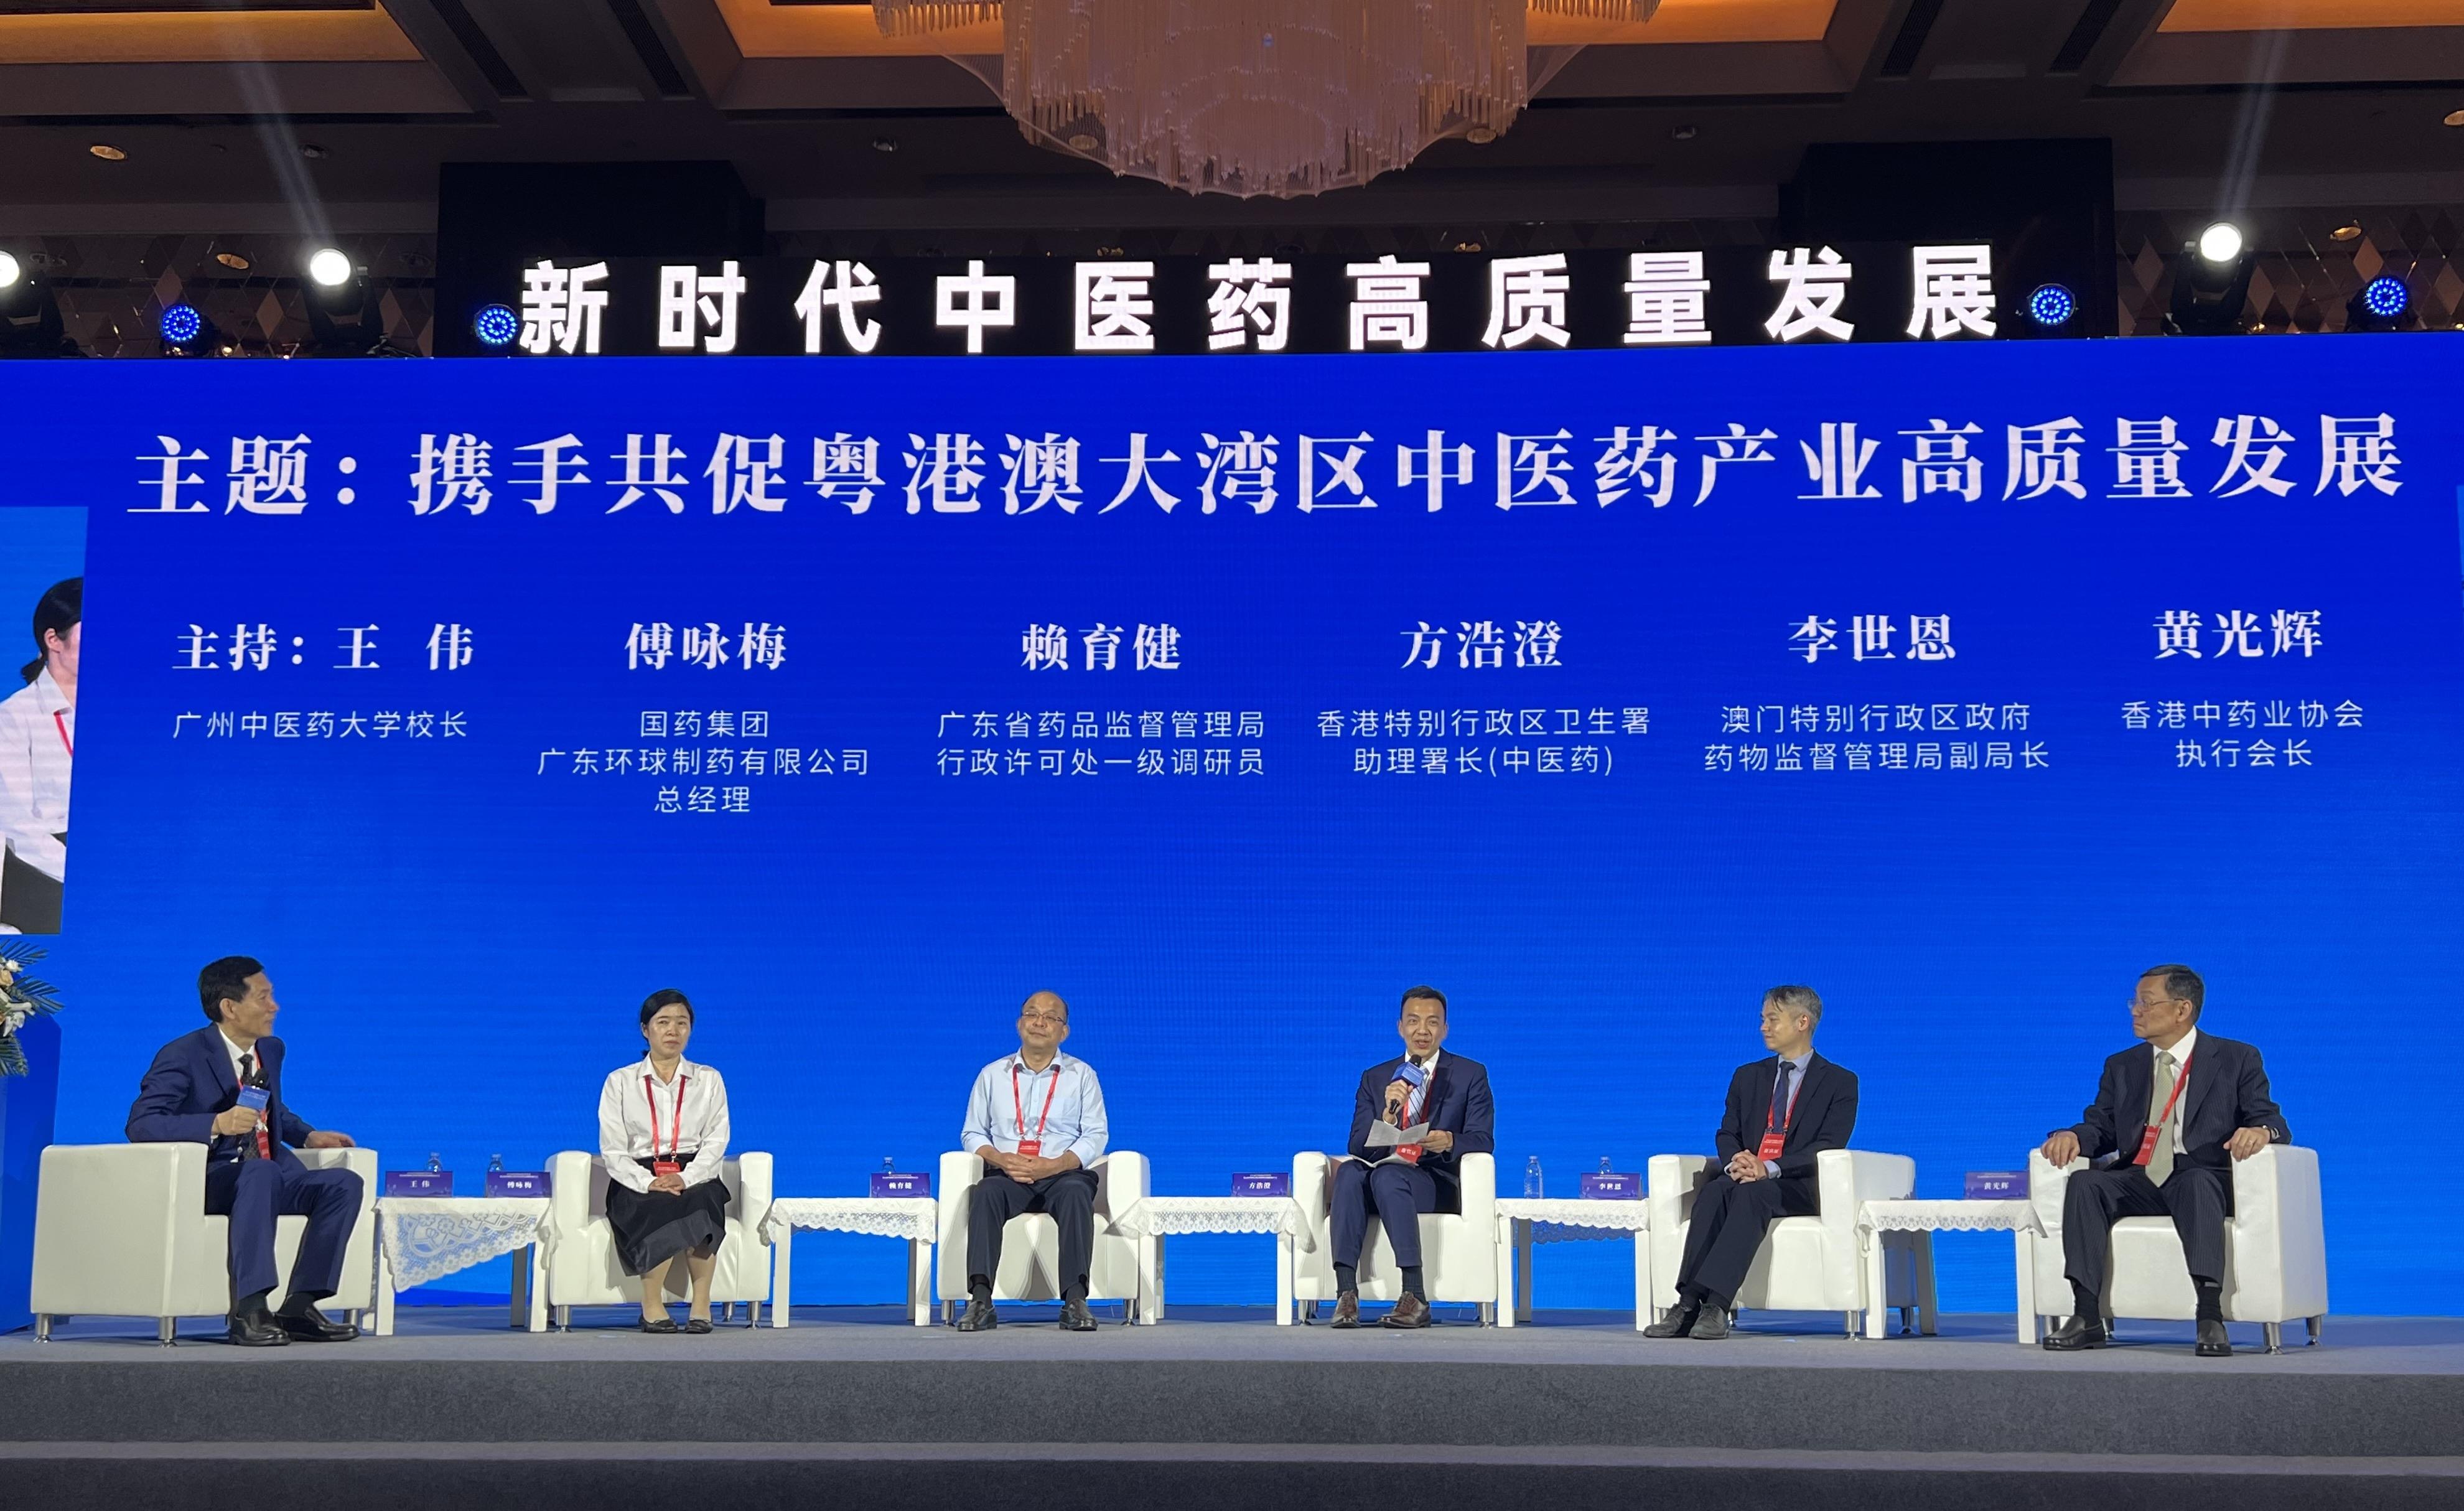 The Secretary for Health, Professor Lo Chung-mau, led a delegation to attend the 5th Guangdong-Hong Kong-Macao Greater Bay Area Conference on Inheritance, Innovation and Development of Traditional Chinese Medicine held in Foshan today (September 14). Photo shows the Assistant Director of Health (Chinese Medicine), Dr Edmund Fong (third right), speaking at the roundtable dialogue session of the conference.